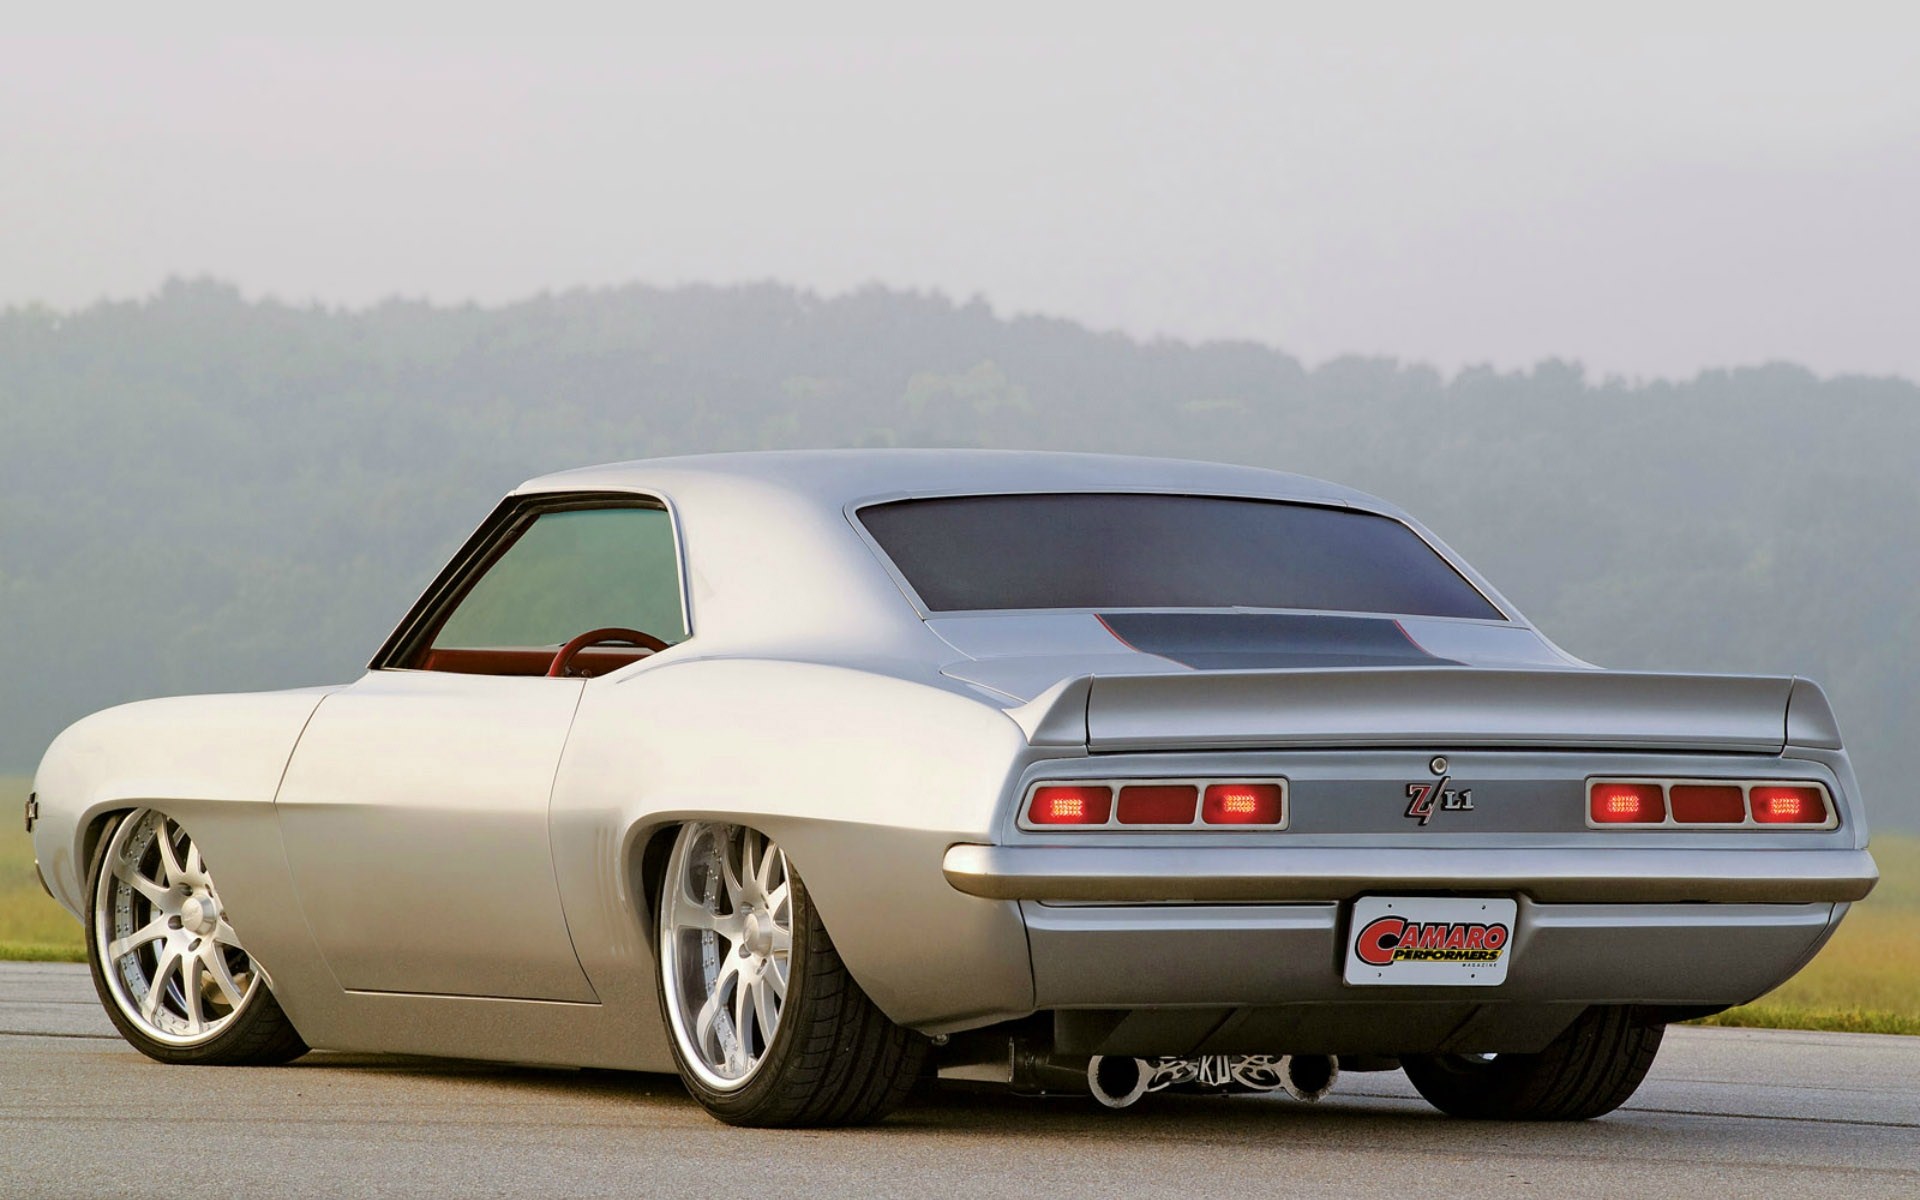 Gallery For Gt American Muscle Cars Wallpaper